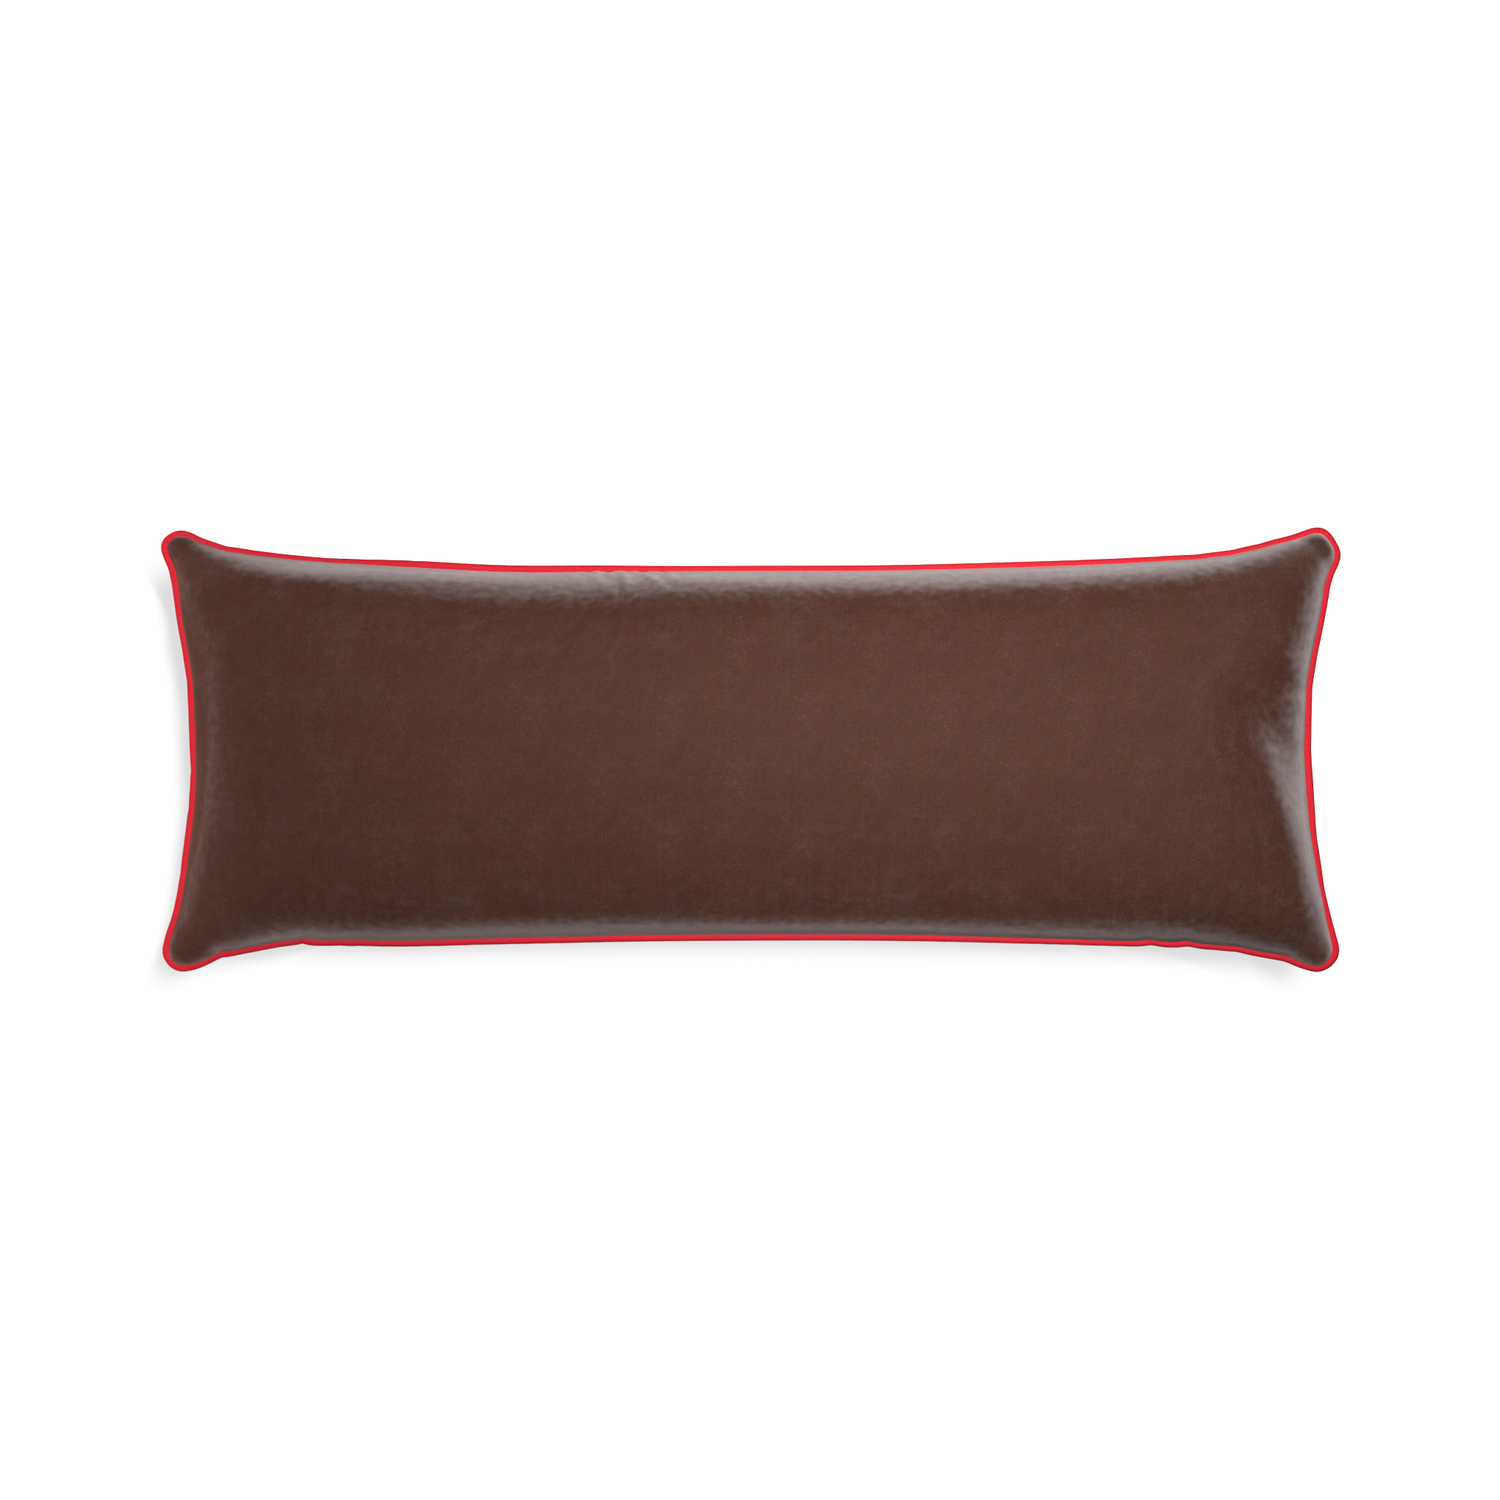 rectangle brown velvet pillow with red piping